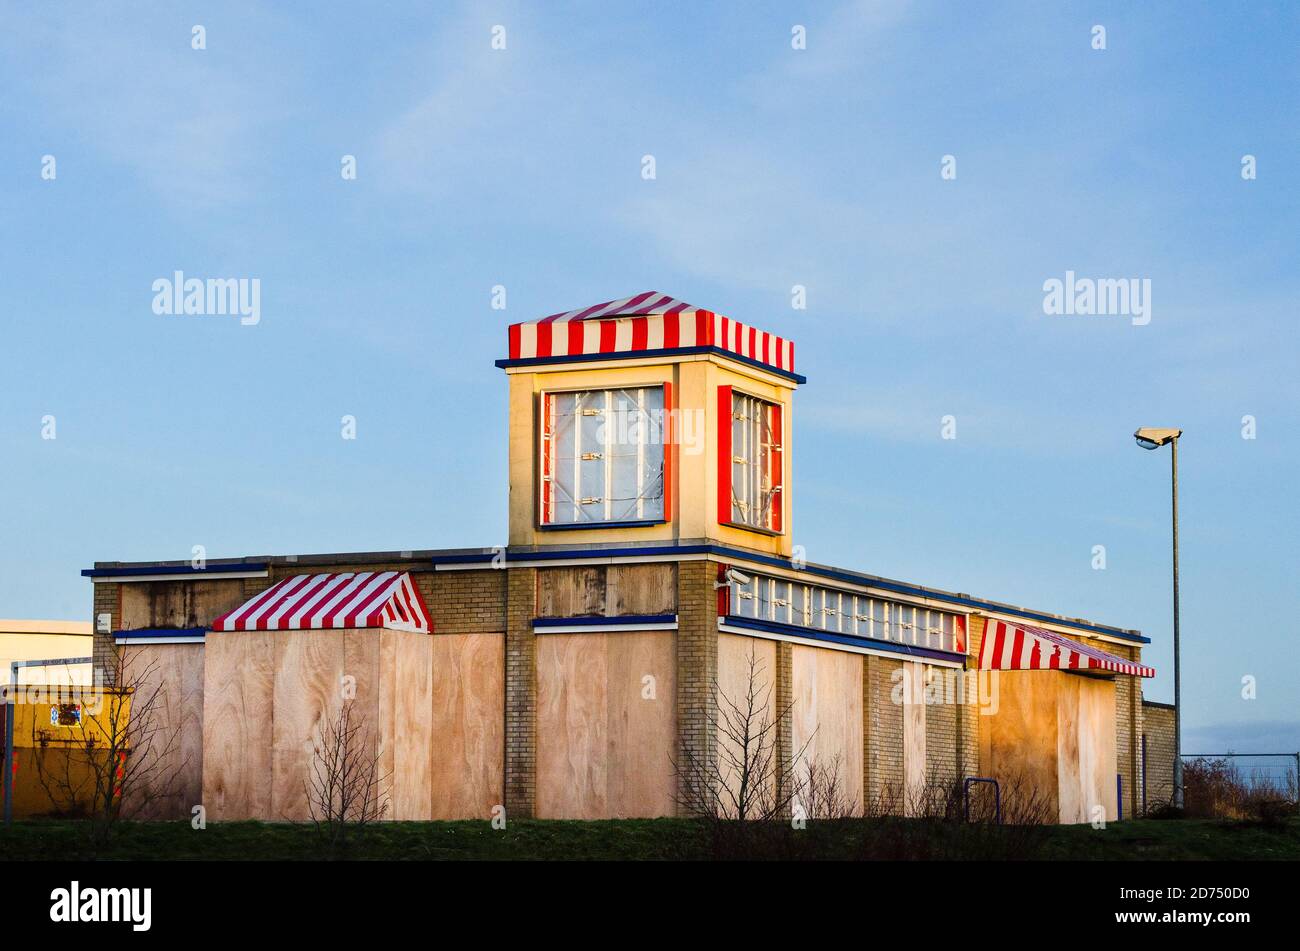 Boarded up derelict KFC fast food outlet Stock Photo